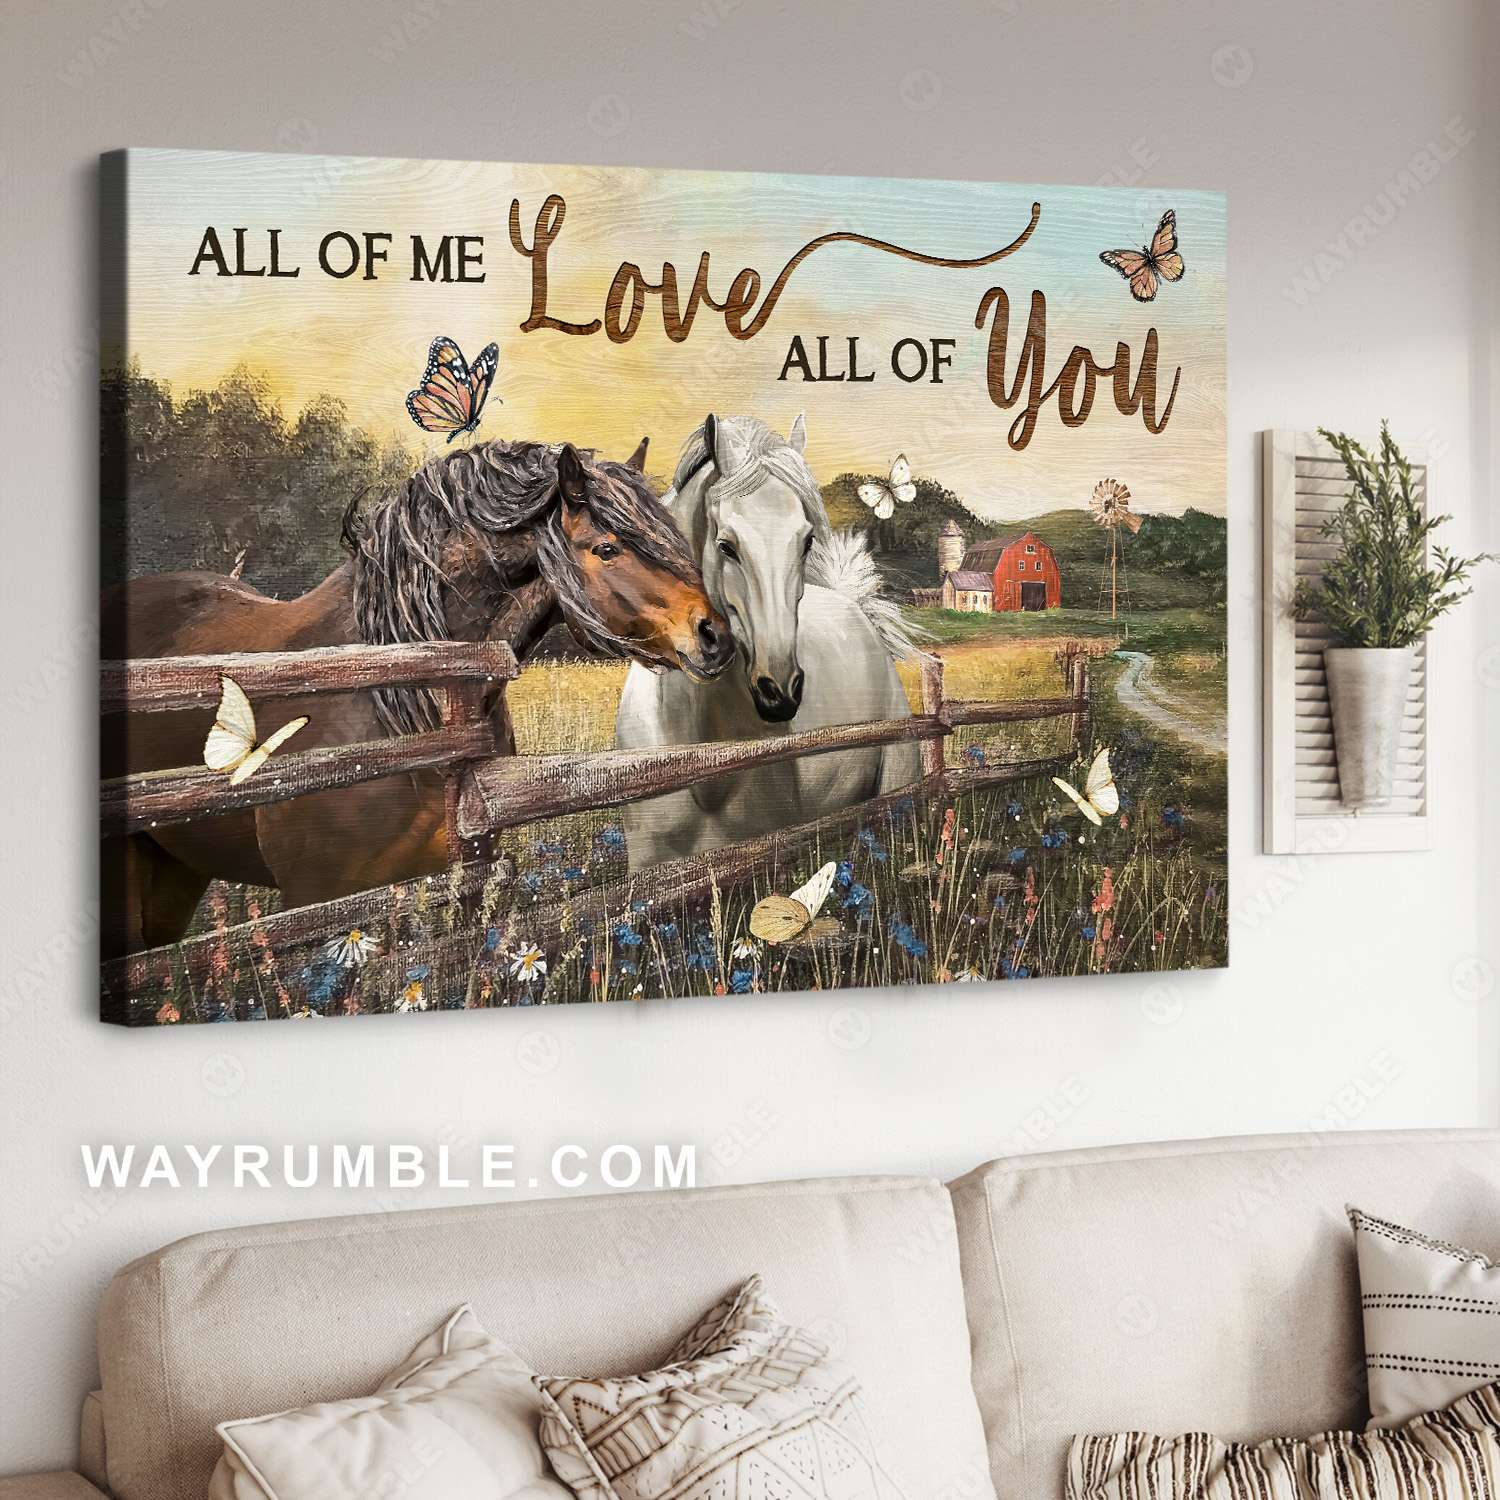 Brown horse, White horse, Old barn, All of me love all of you - Family Landscape Canvas Prints, Wall Art